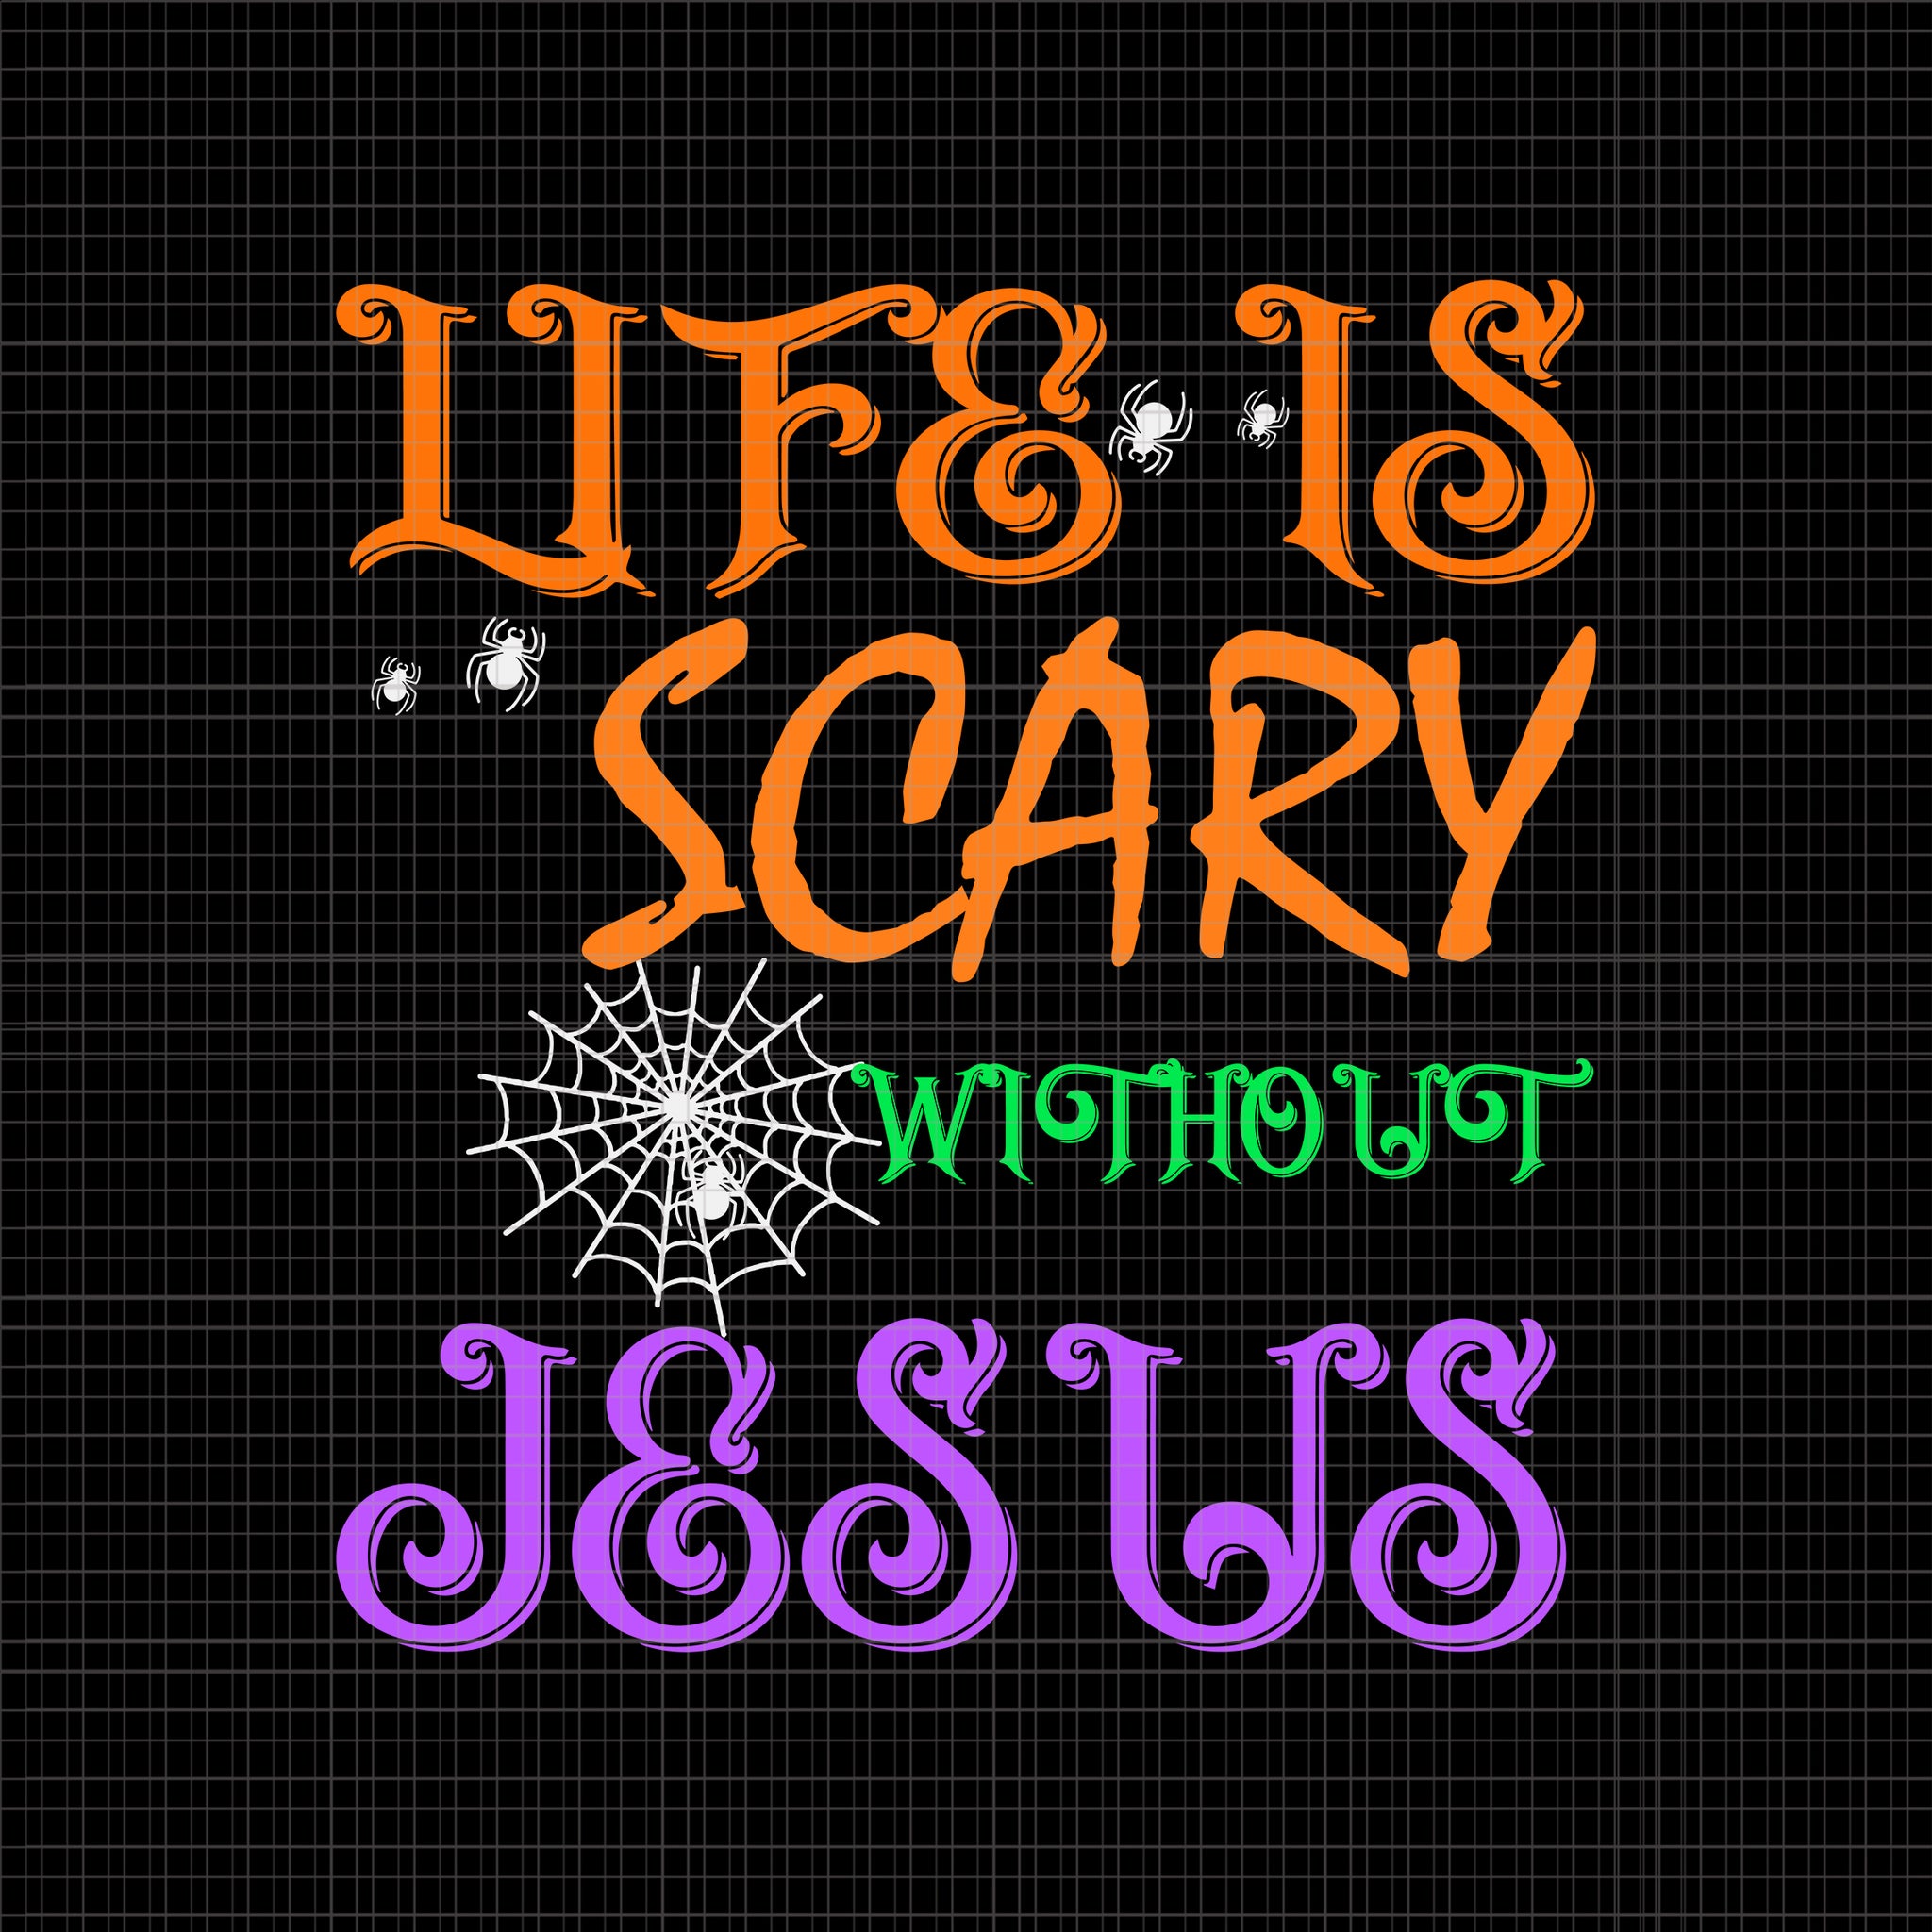 Life Is Scare Without Jesus Svg, Fall Christian Svg, Halloween Jesus Svg, Jesus Svg, Halloween Svg